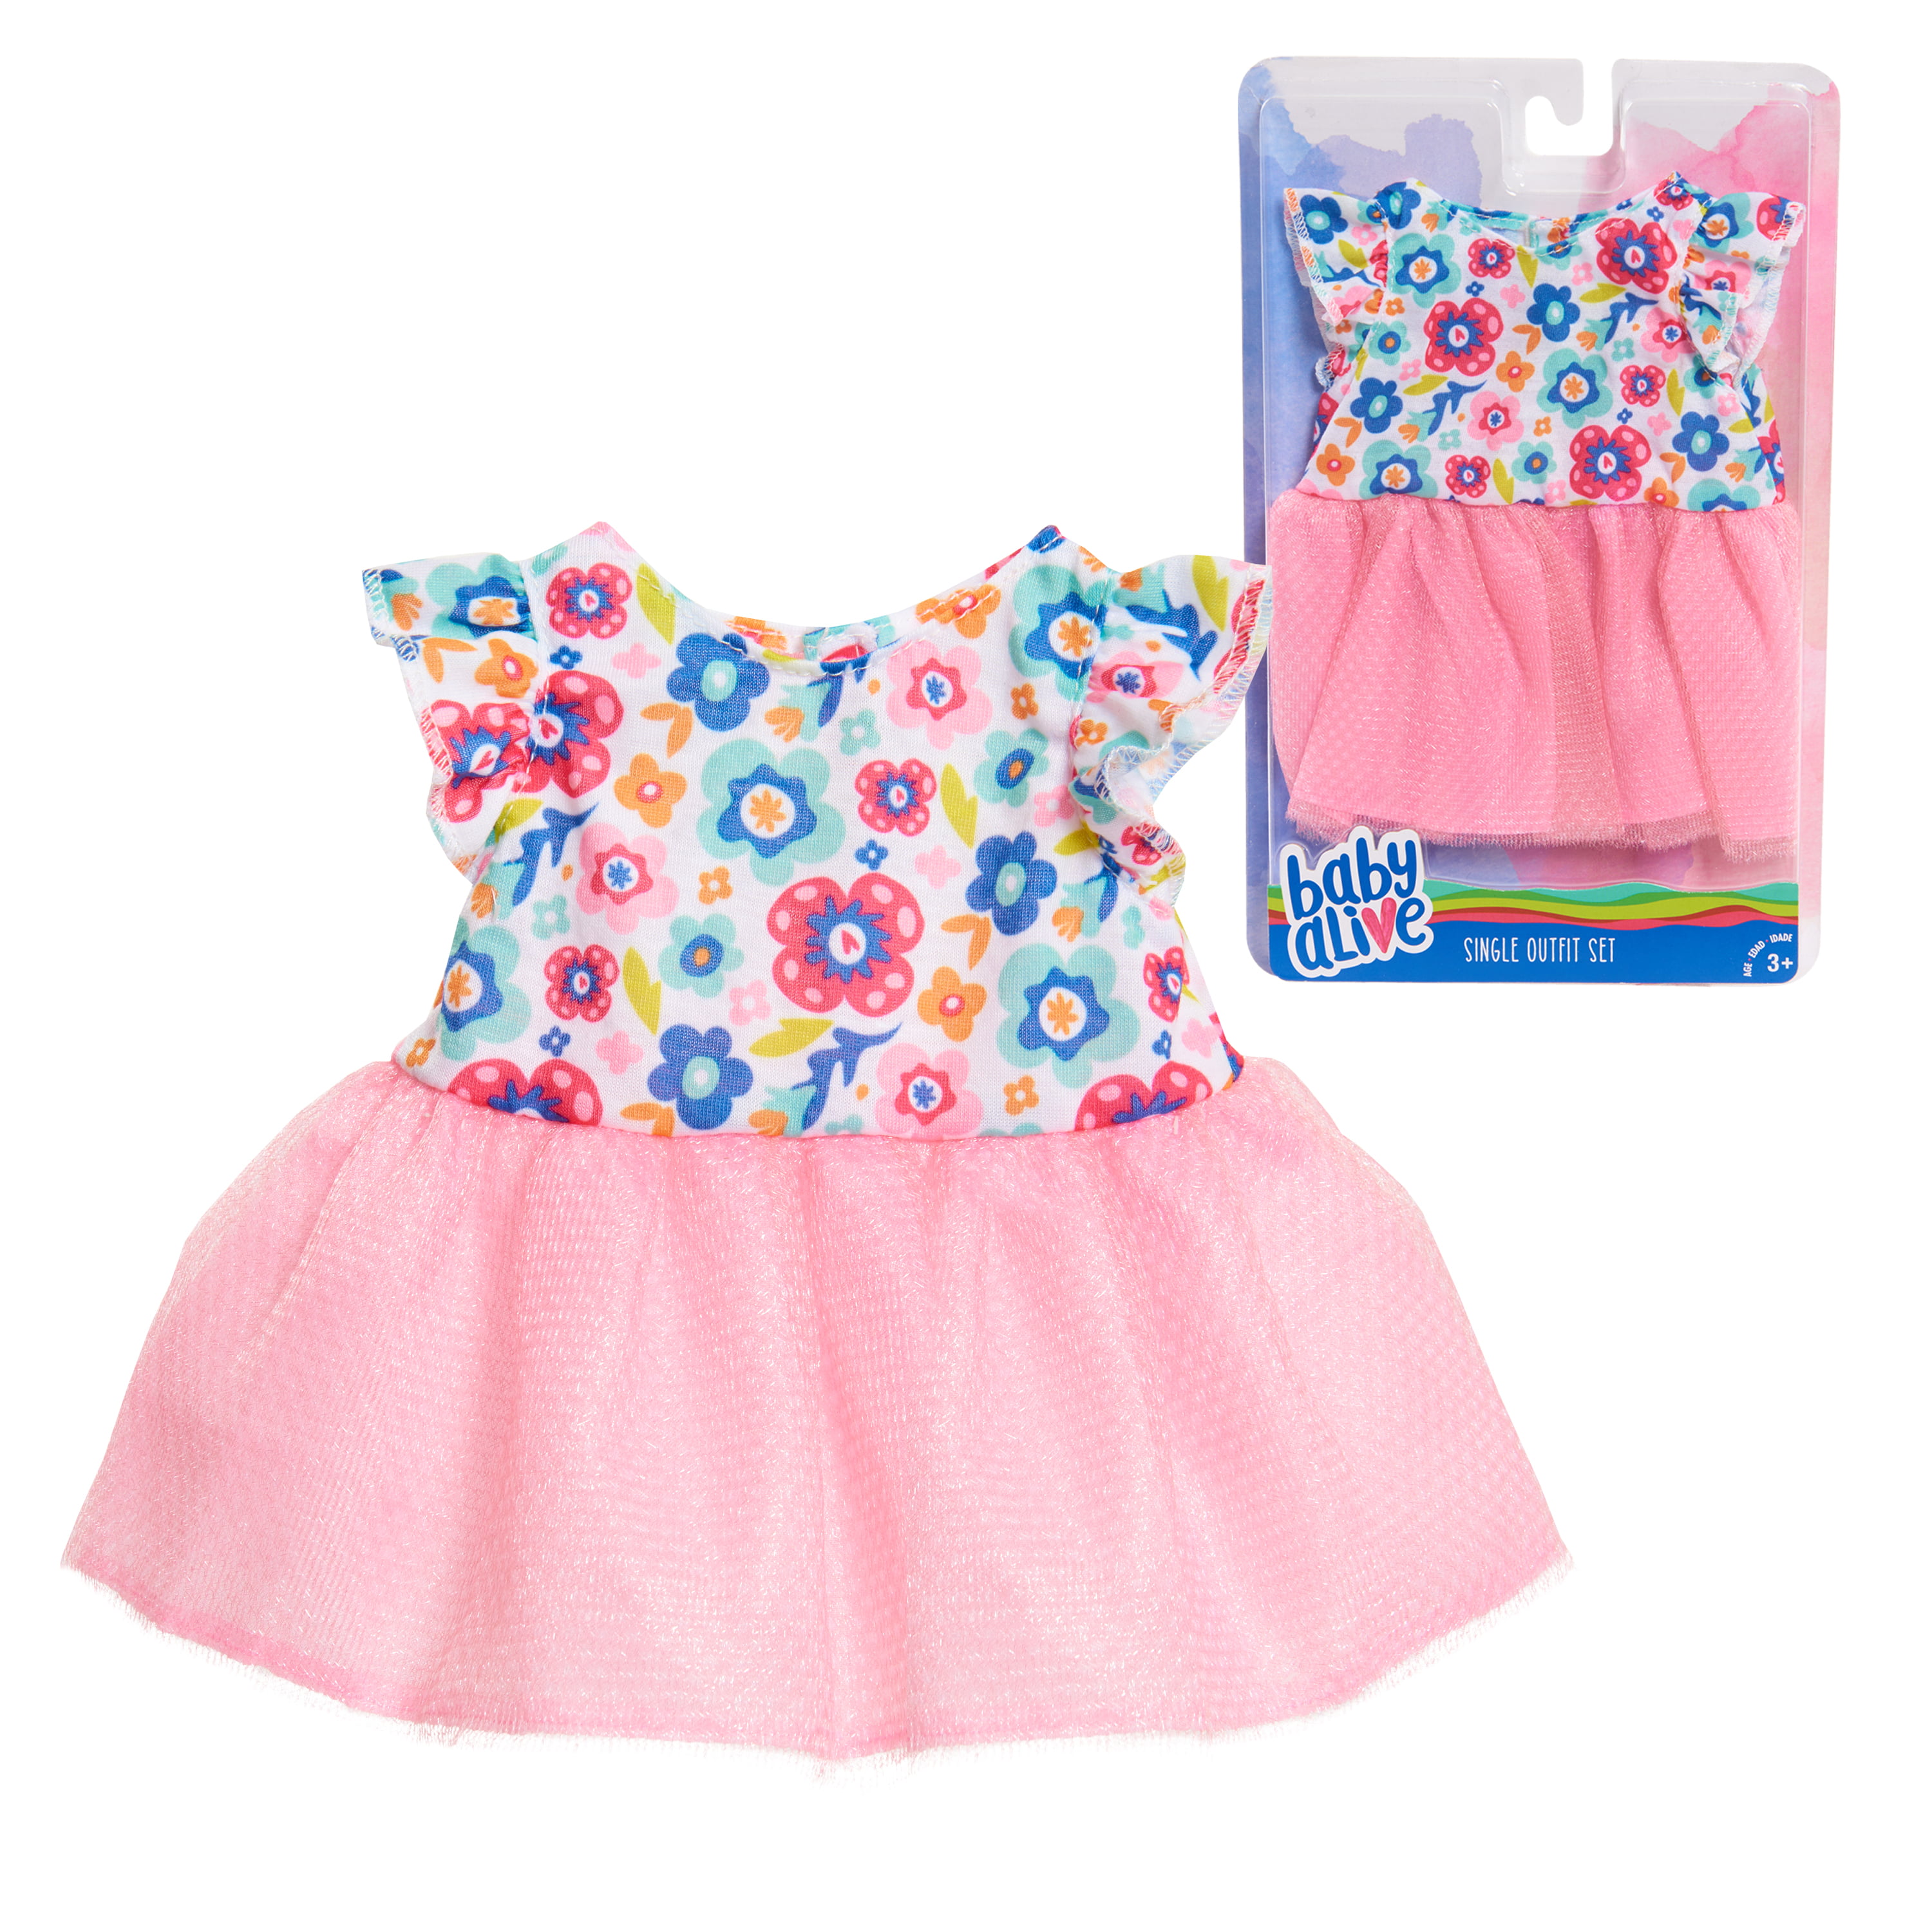 Baby Alive Outfits on Sale, 58% OFF | empow-her.com